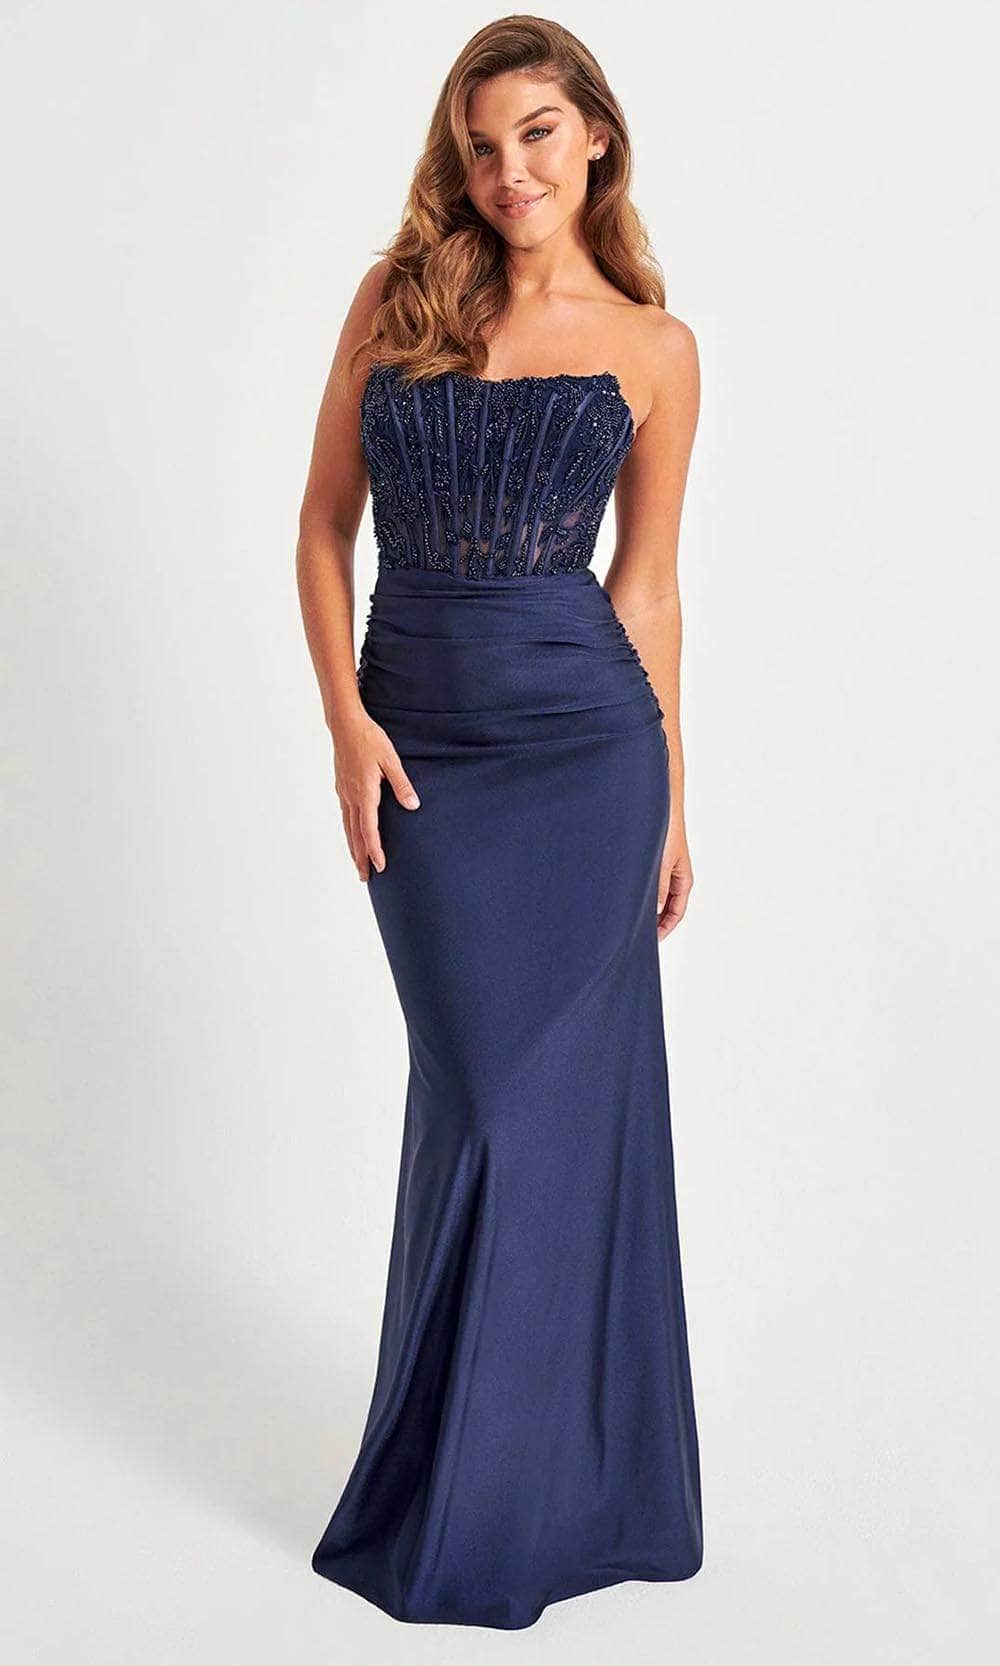 Faviana 11081 - Strapless Corset Prom Gown
